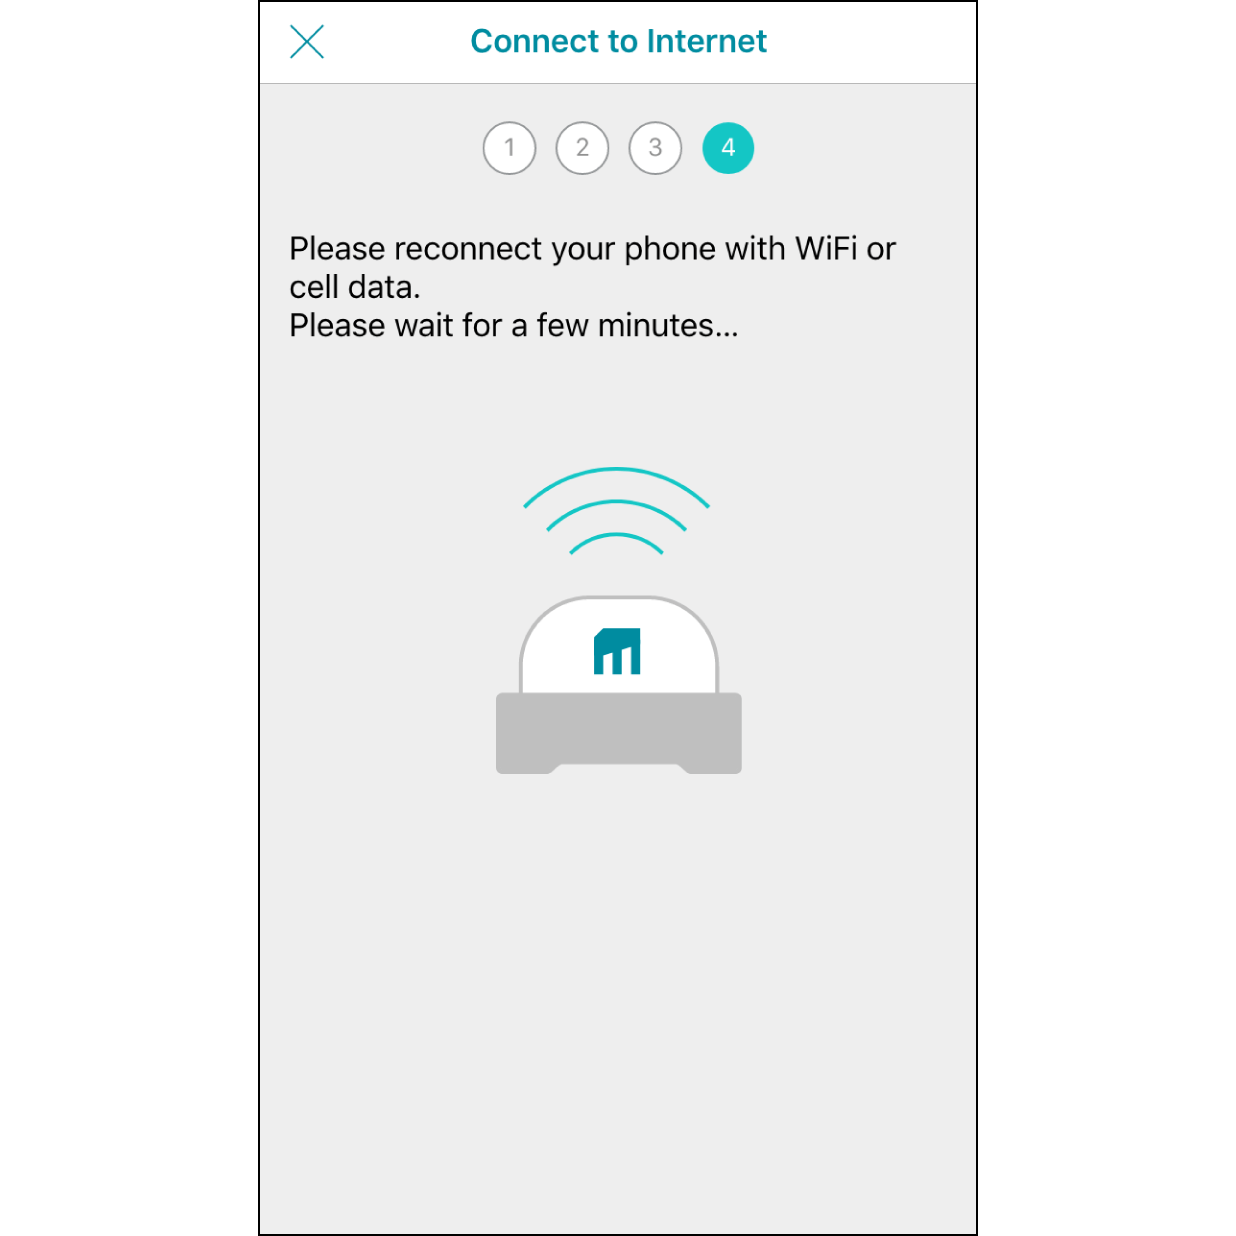 10. Connect Your Muro Box with Wi-Fi. Wait for the Muro Box to connect to the Wi-Fi for 30 seconds.